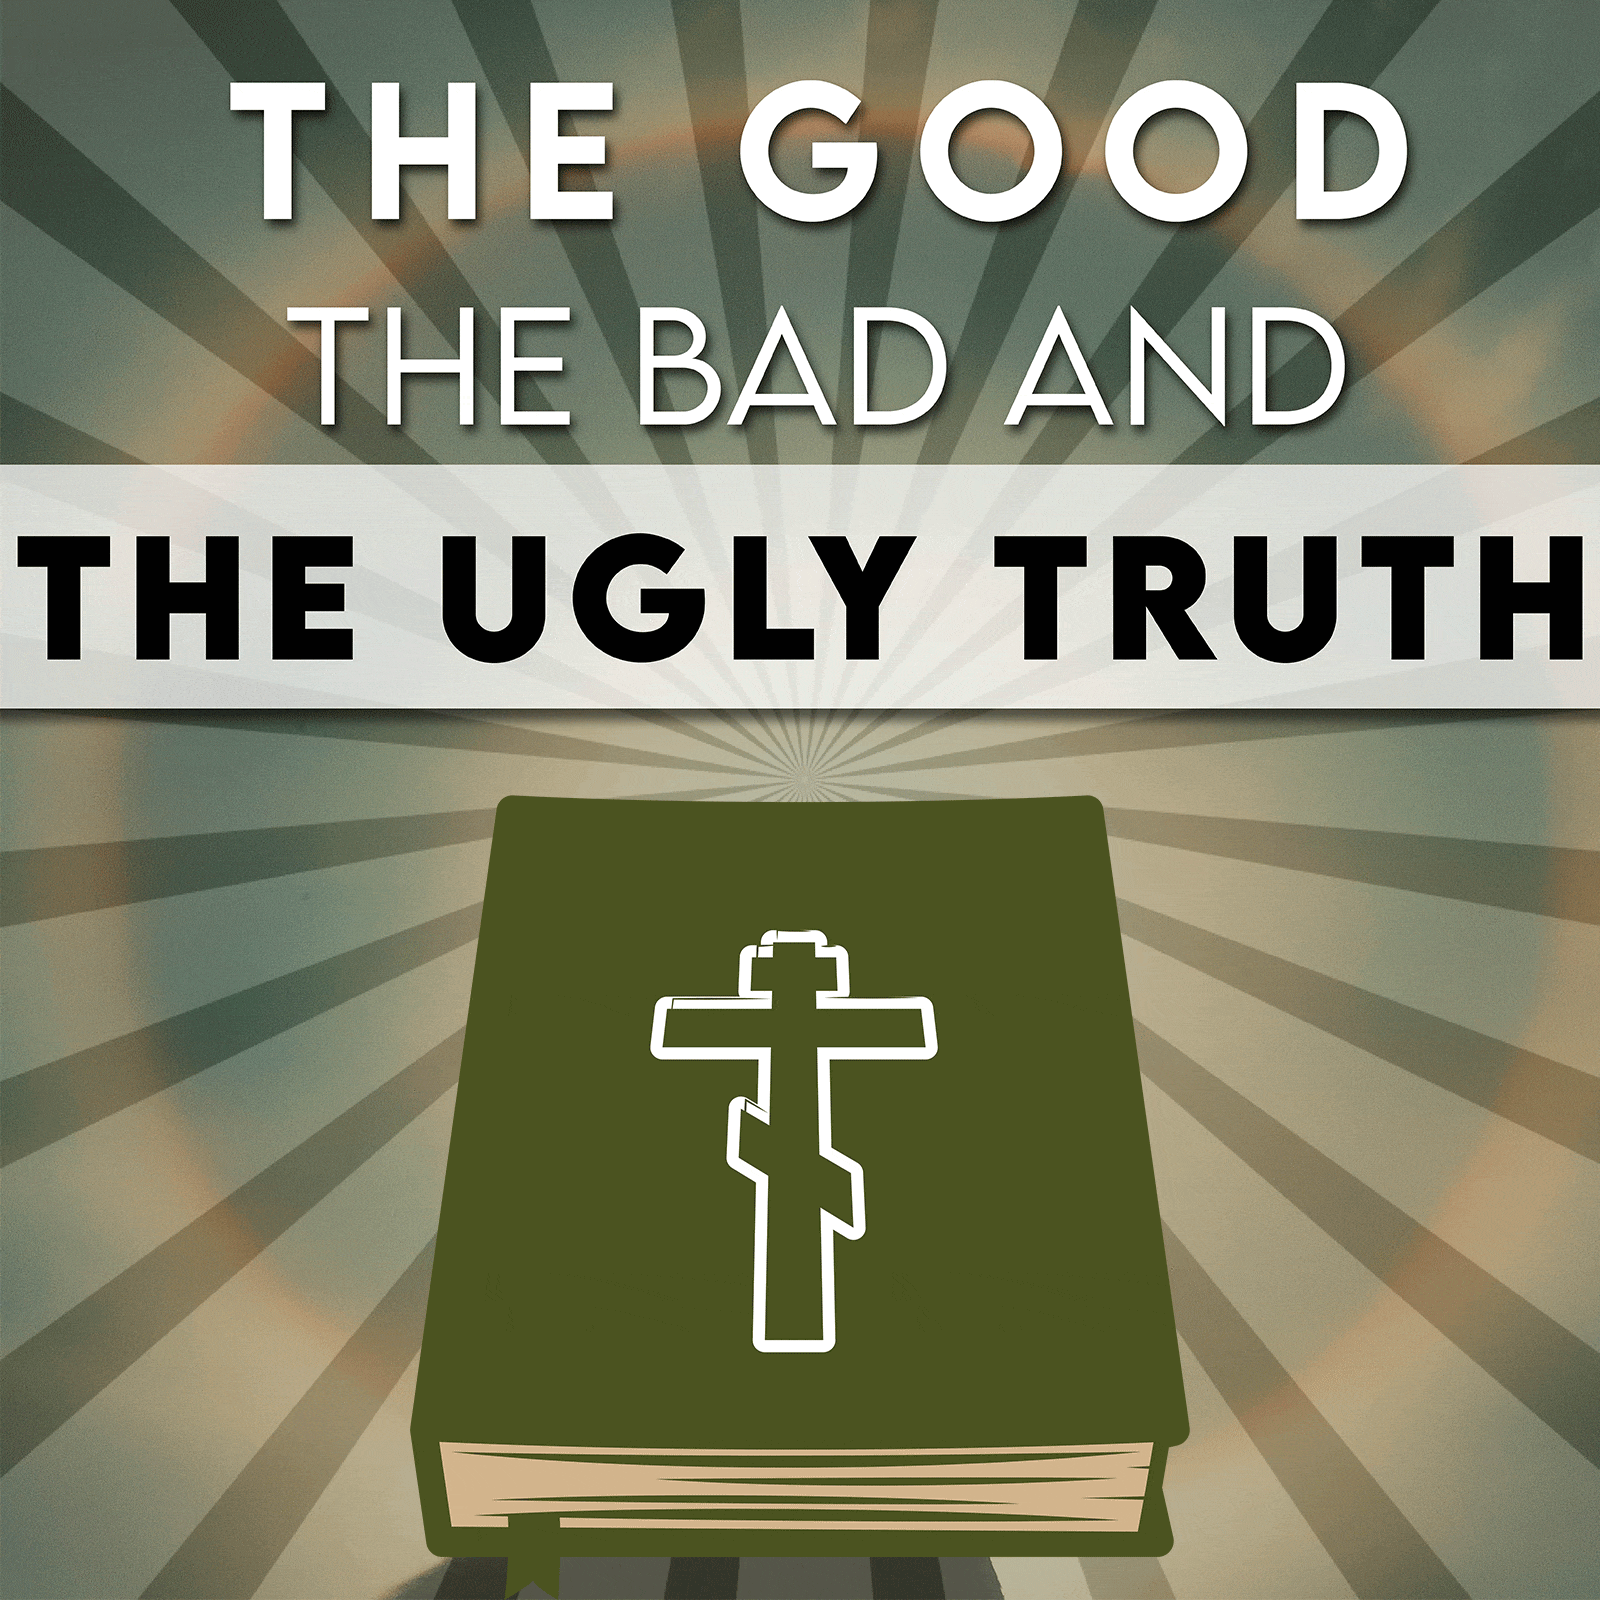 The Good, The Bad, and The Ugly Truth